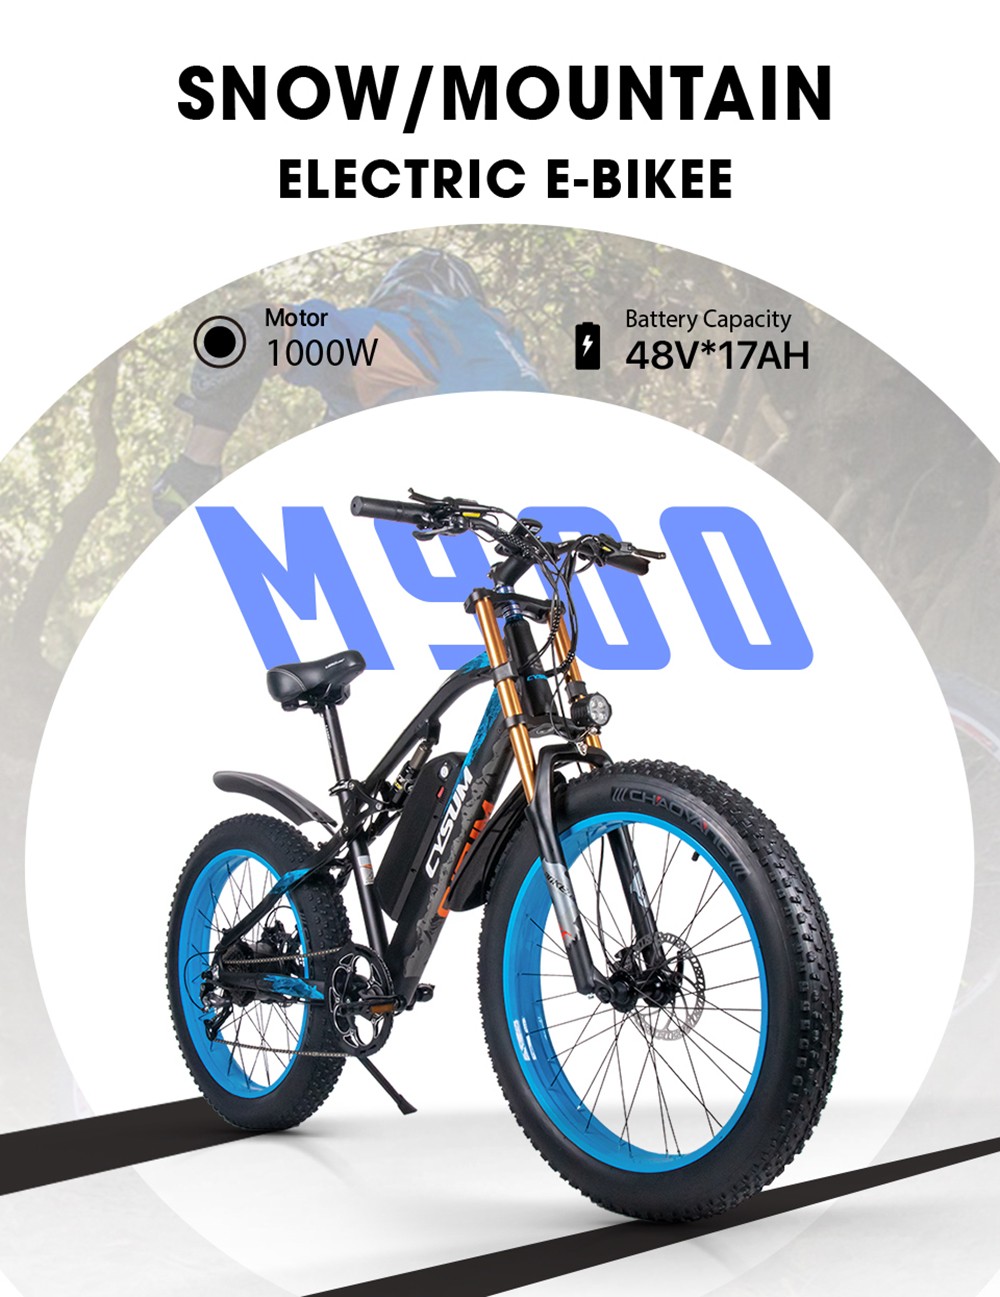 CYSUM M900 Fat Tire Electric Bike 48V 1000W Brushless Gear Motor 17Ah Removable Battery for 50-70 Range - Pure-Black